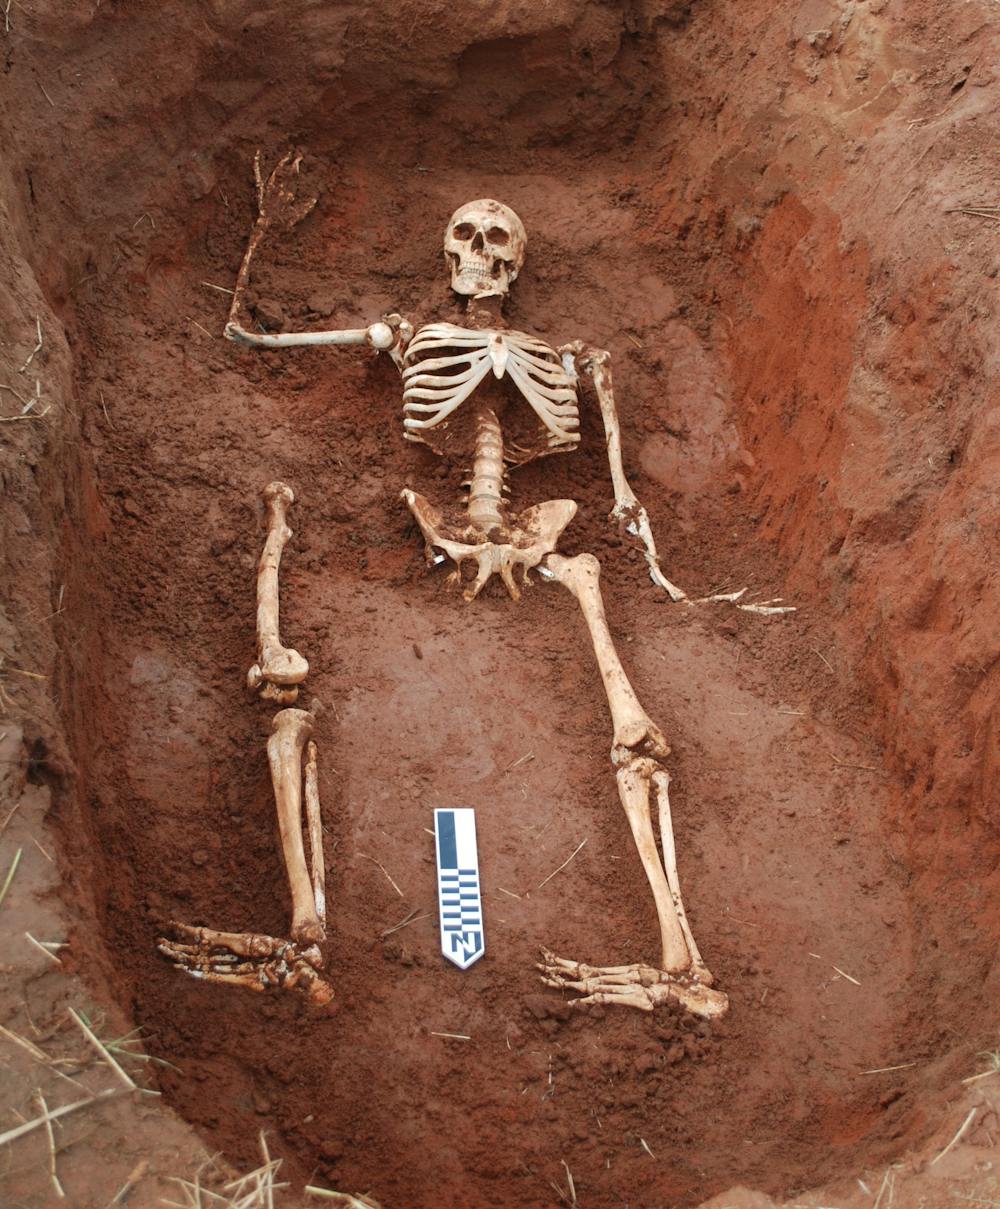 Forensic anthropologists work to identify human skeletal remains and  uncover the stories of the unknown dead